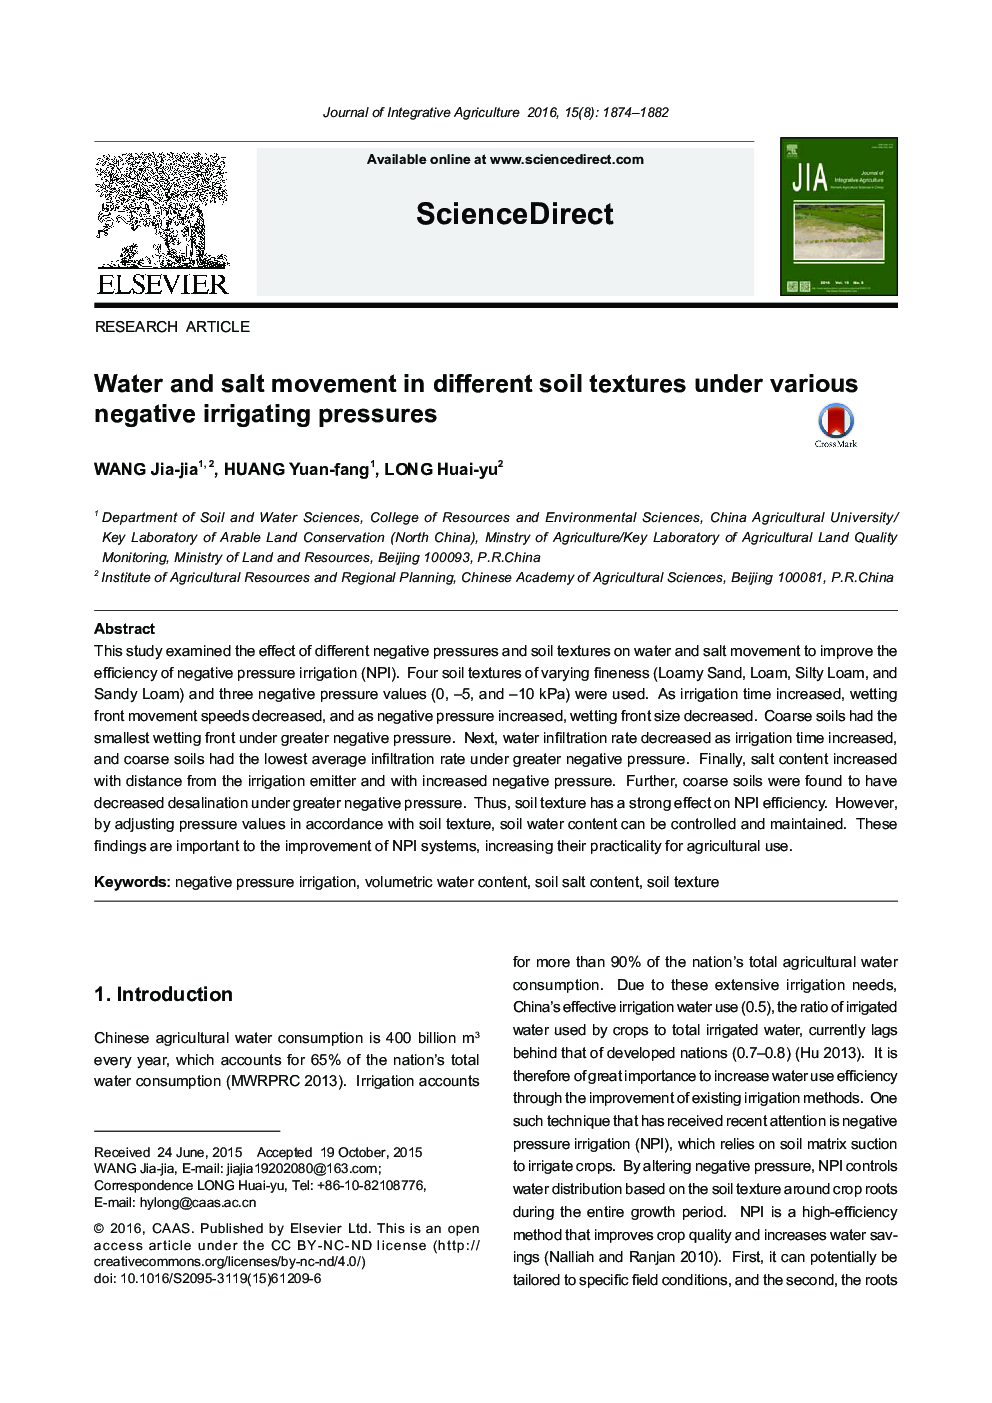 Water and salt movement in different soil textures under various negative irrigating pressures